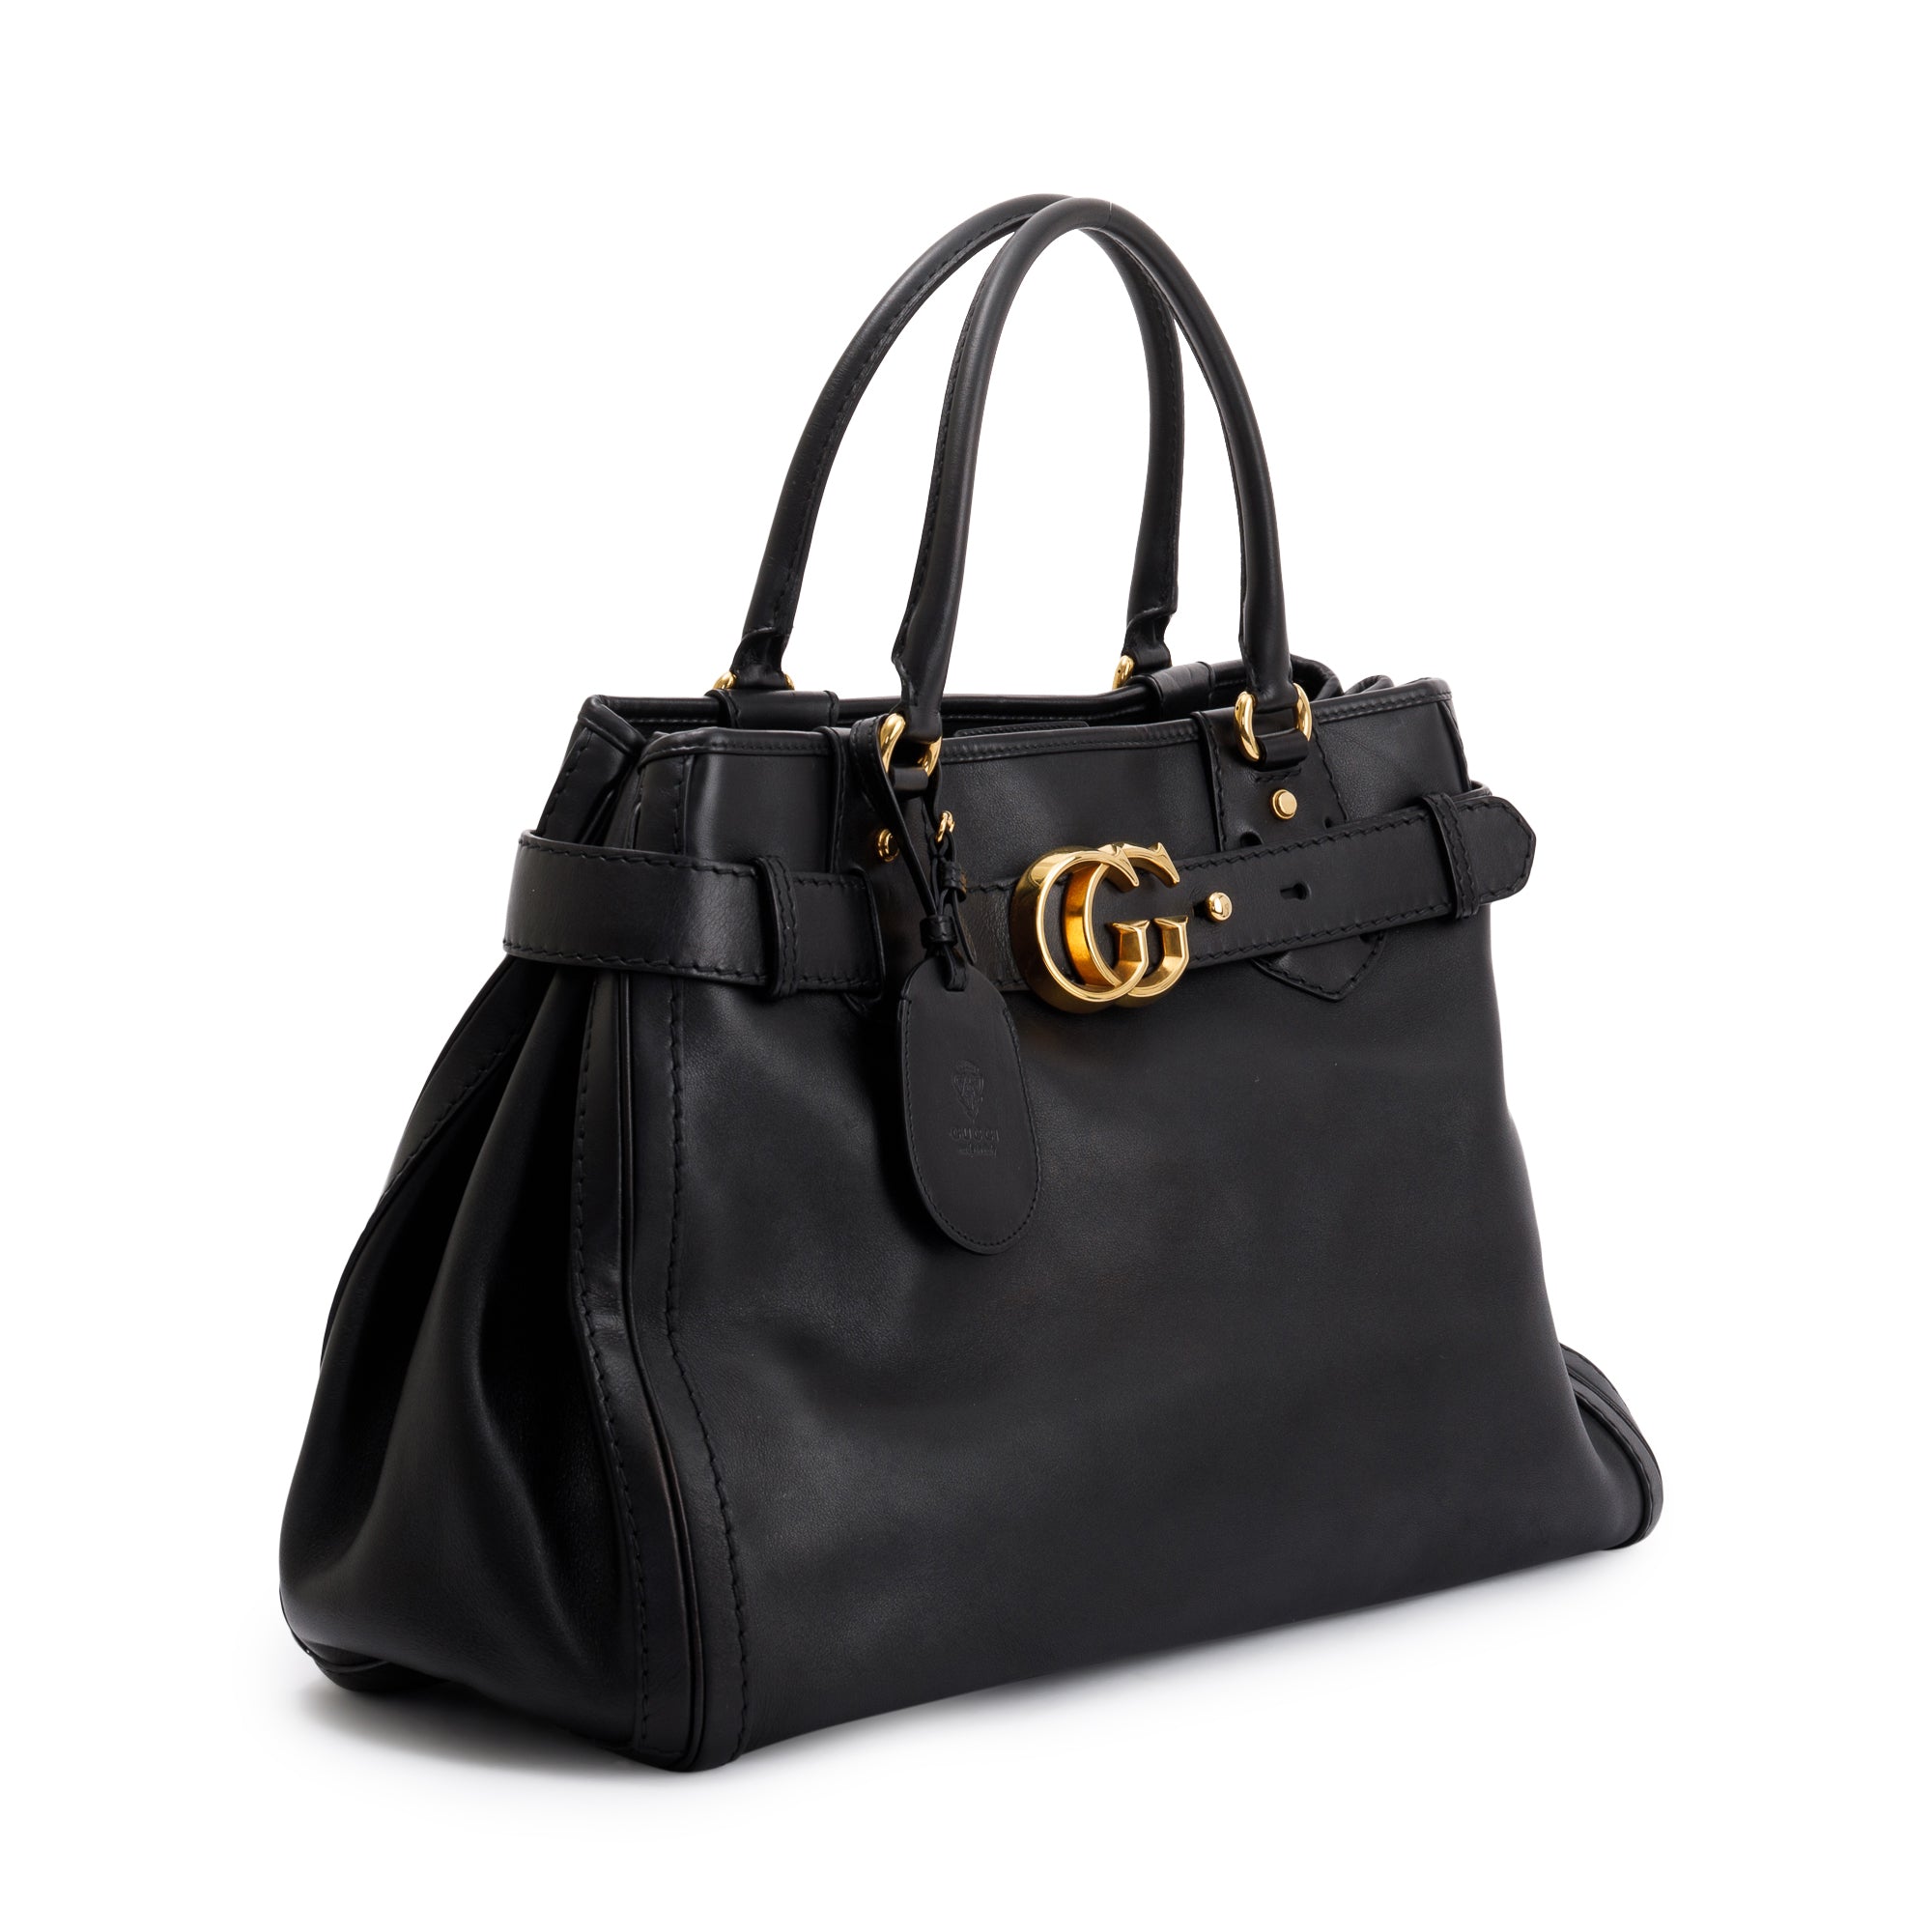 Gucci Black Leather Large GG Running Tote